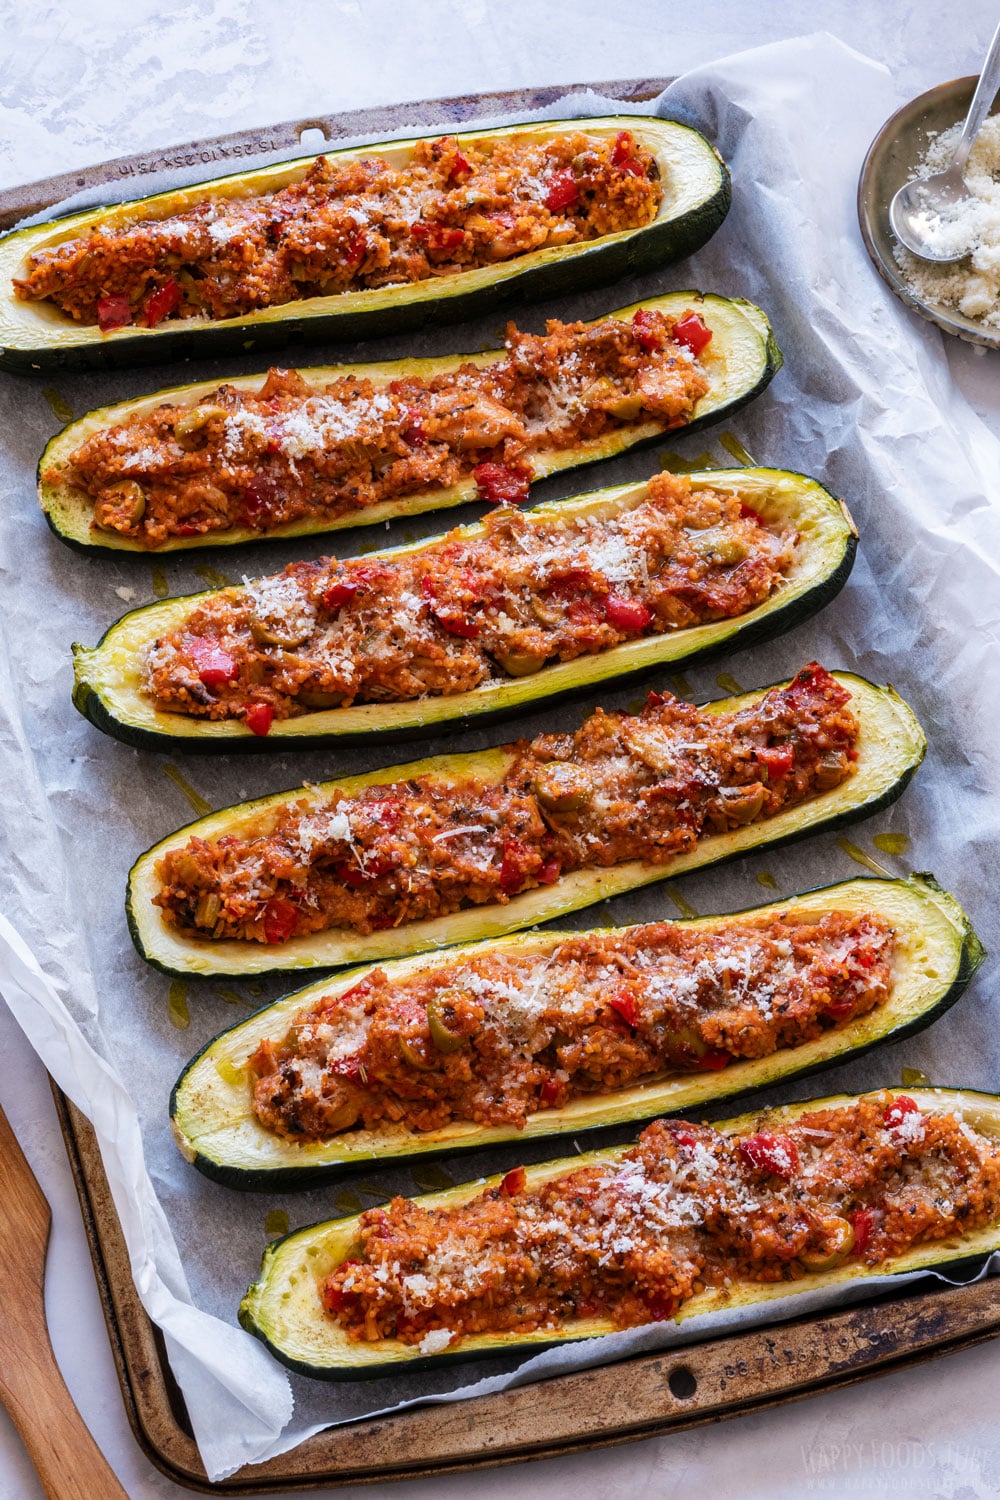 Cooked zucchini boats on the tray.